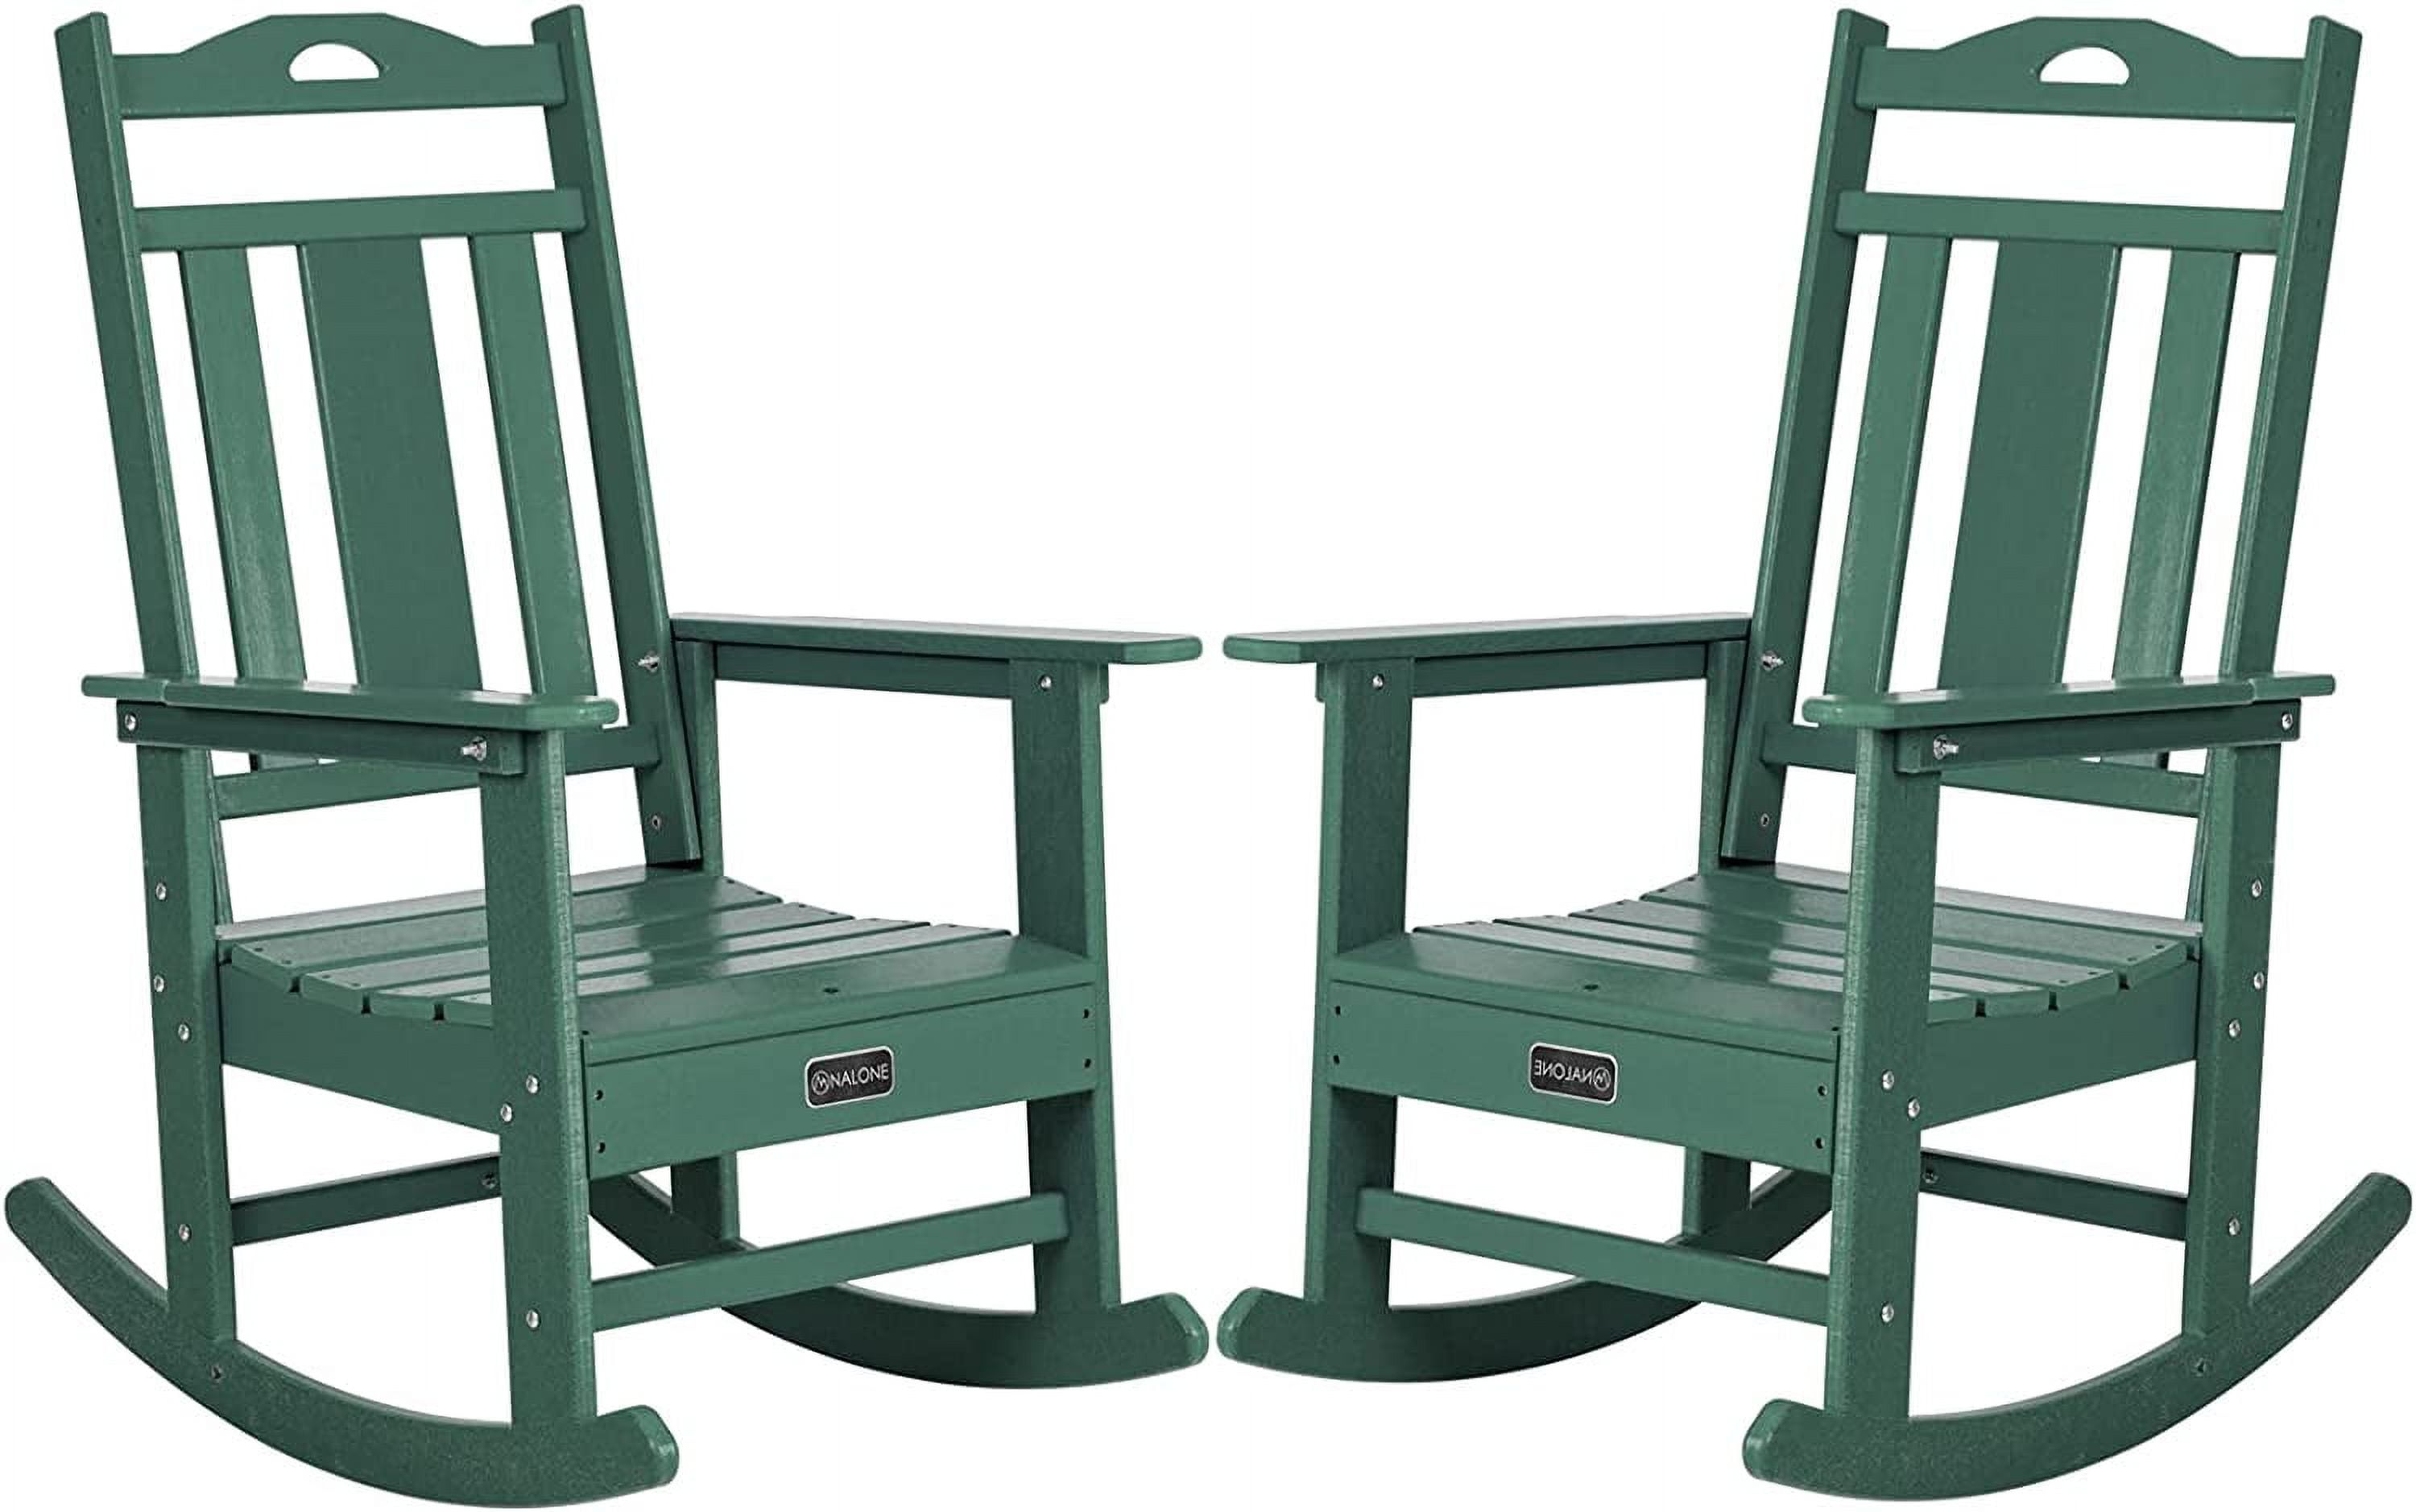 NALONE Outdoor Rocking Chair Set of 2, All Weather Resistant